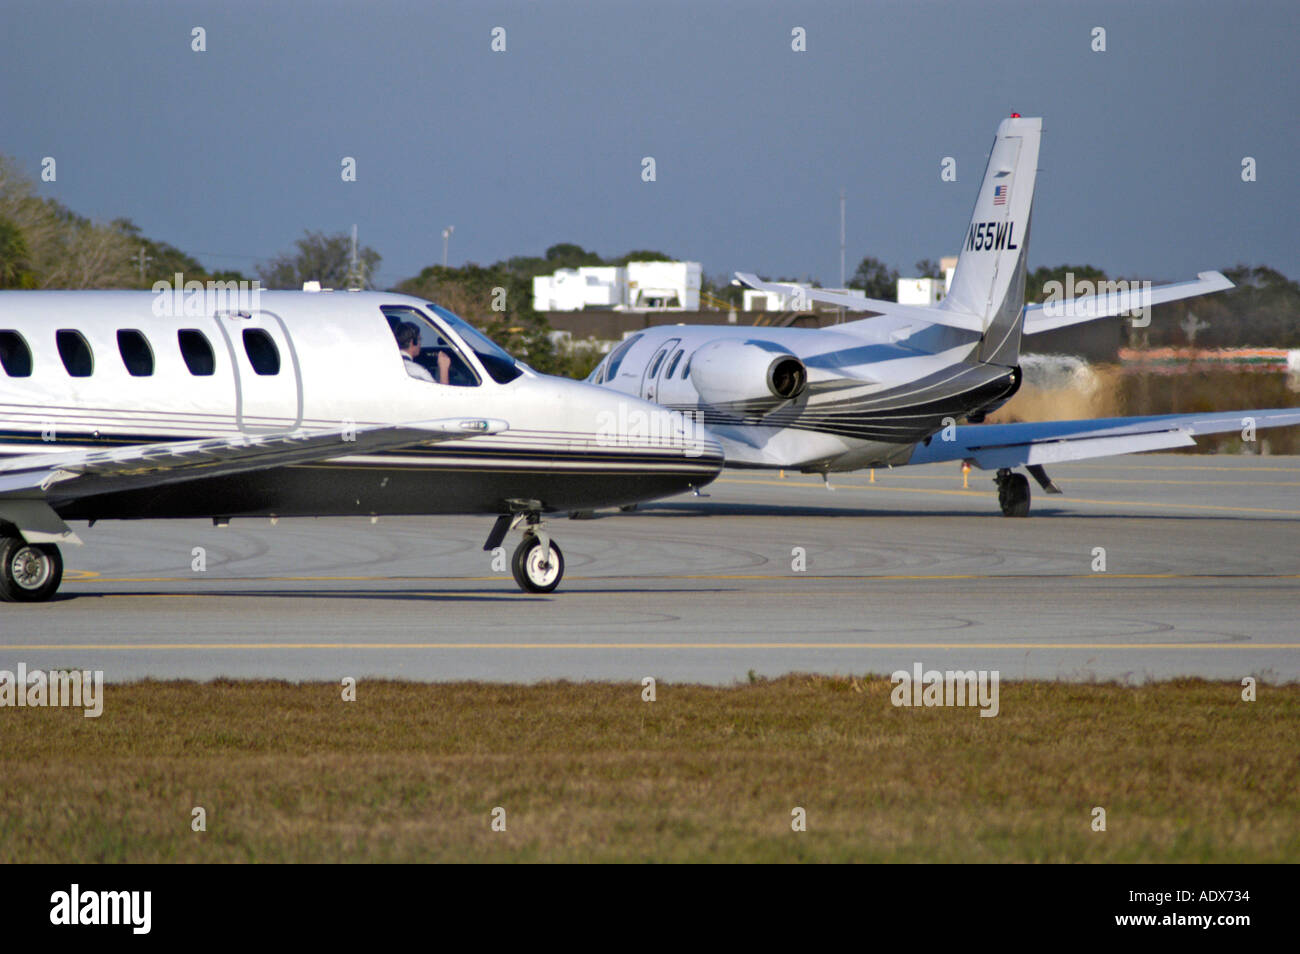 Airplanes following each other to takeoff biz jets cessna citations Stock Photo